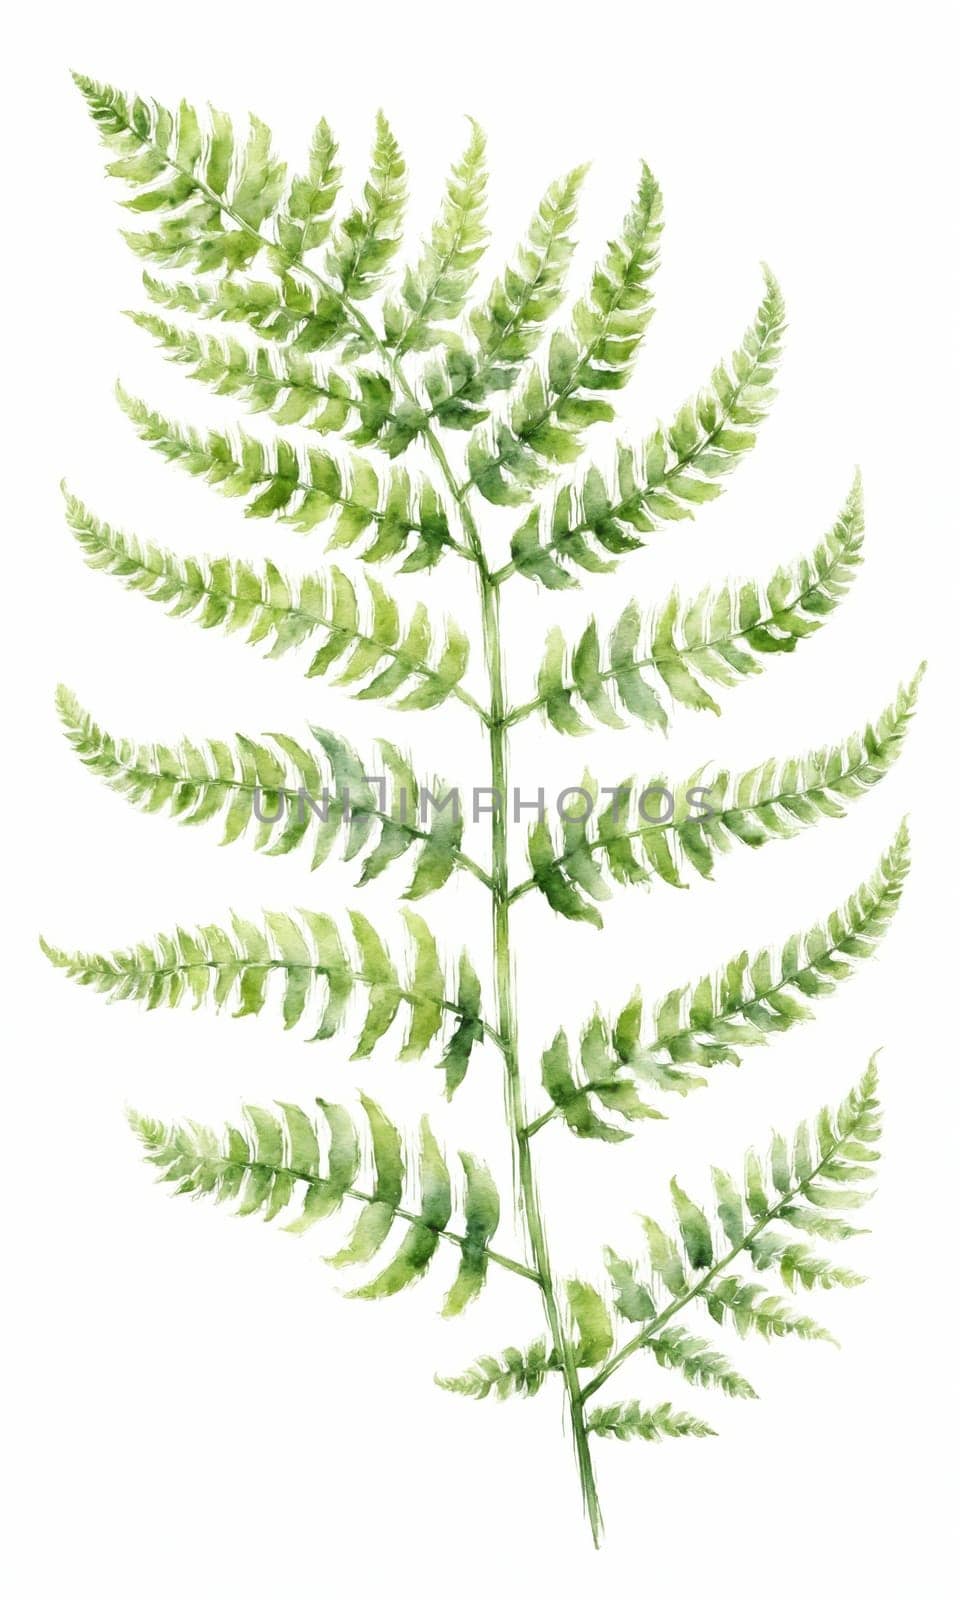 watercolor drawing of green fern leaf on white background by Andre1ns